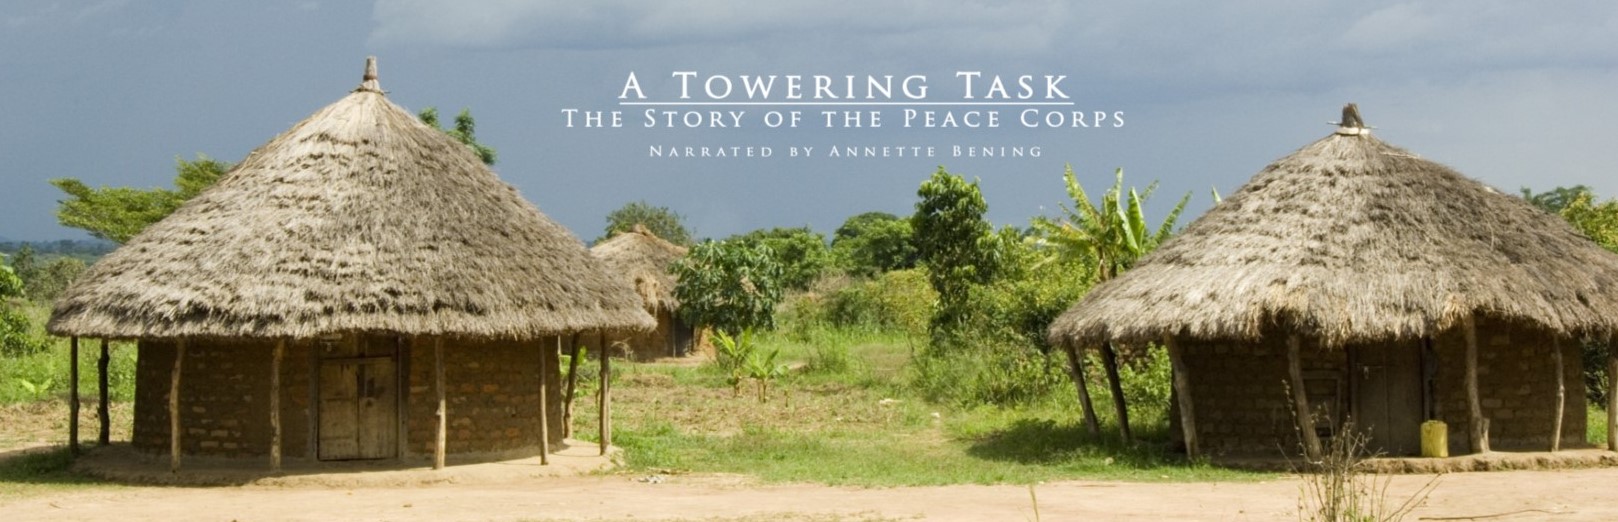 A Towering Task - Peace Corps documentary